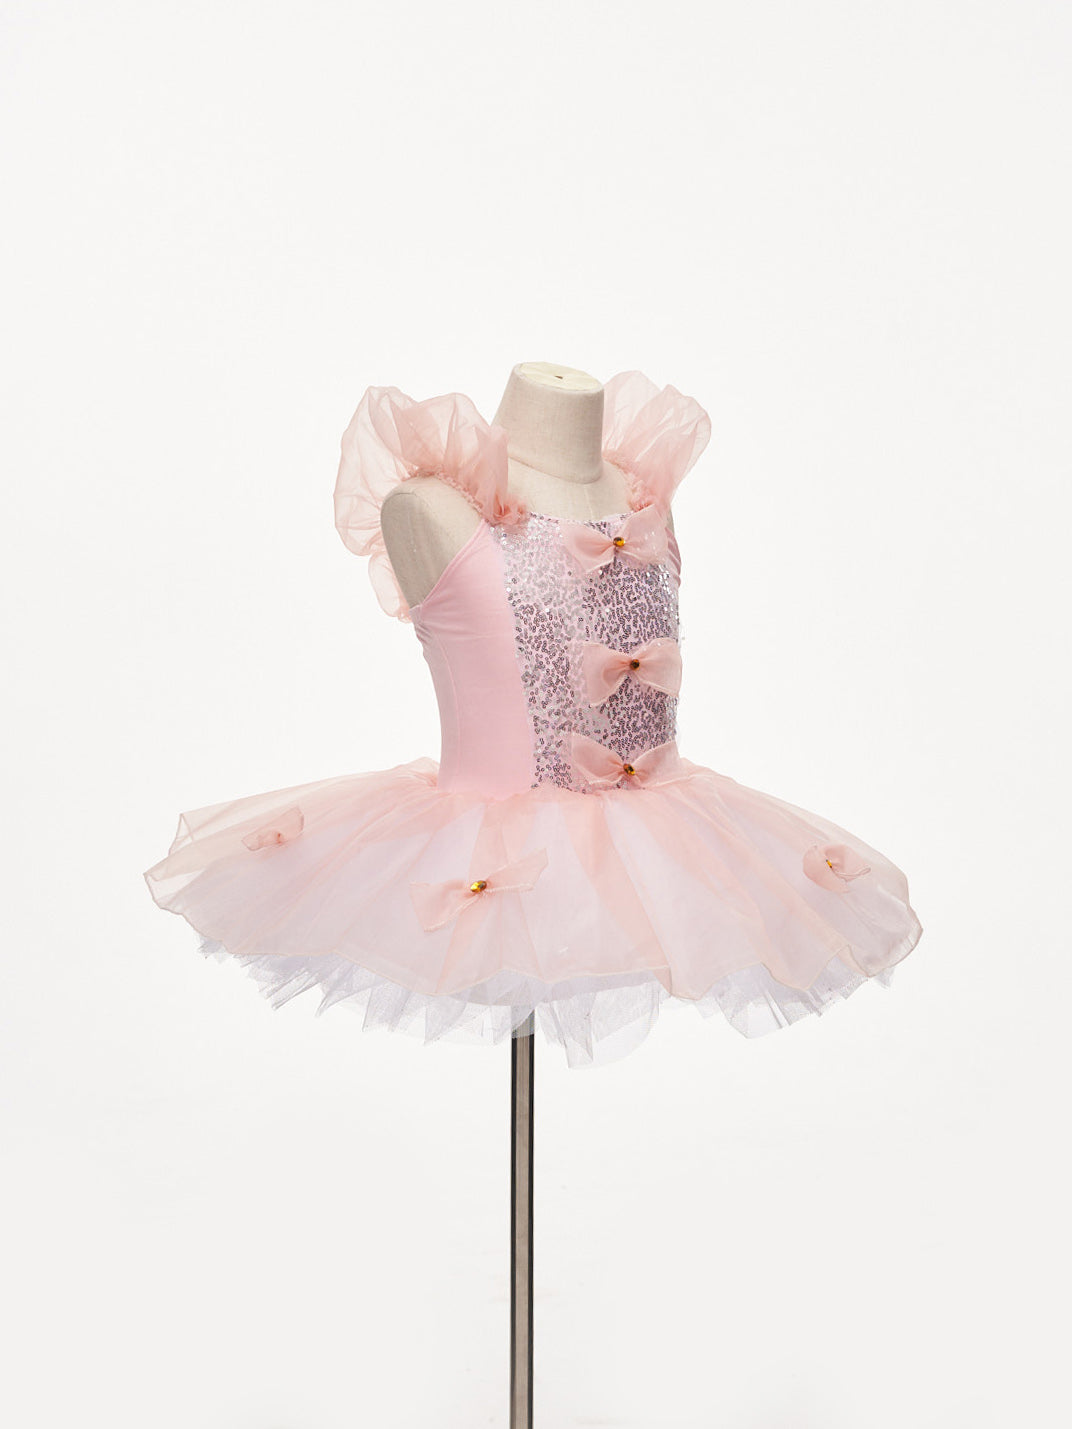 Kate Light Peachy Pink Bow Tie Sequin Ballet Kids Dress for Photography